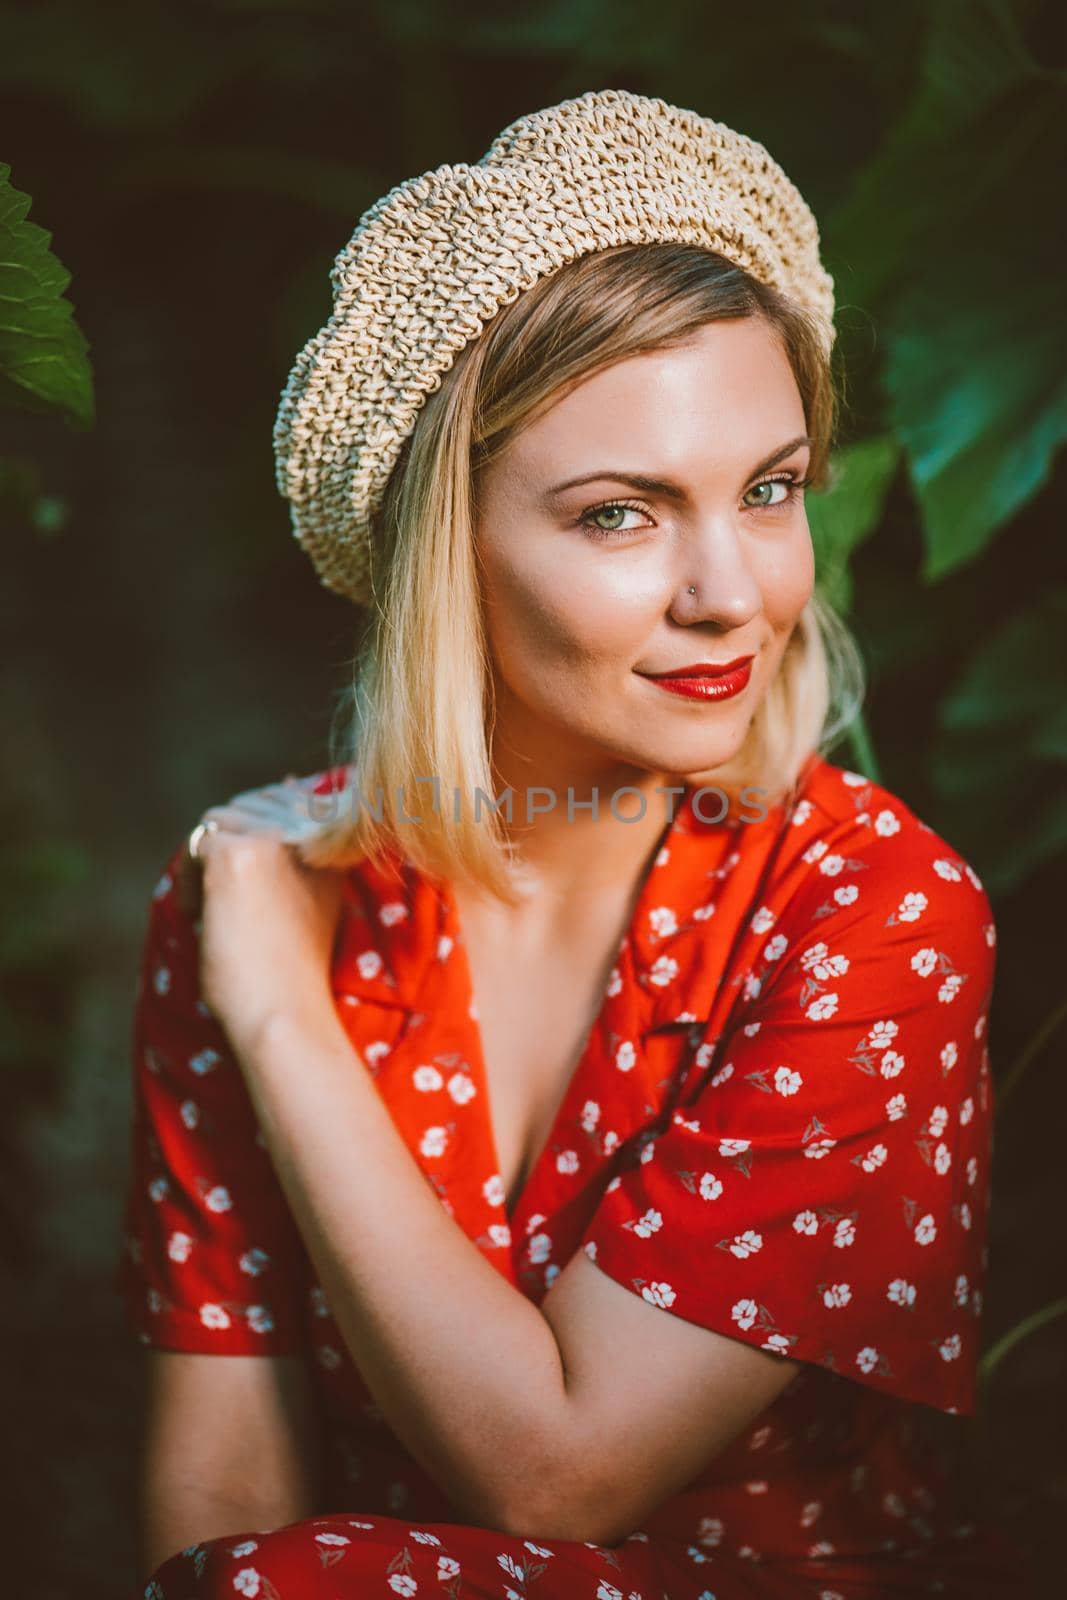 Beautiful portrait of attractive blonde woman in straw beret hat . Girl sitting between plants. Nature background. Retro floral dress, red lips. Pleasant feminine appearance, kind smile. by kristina_kokhanova